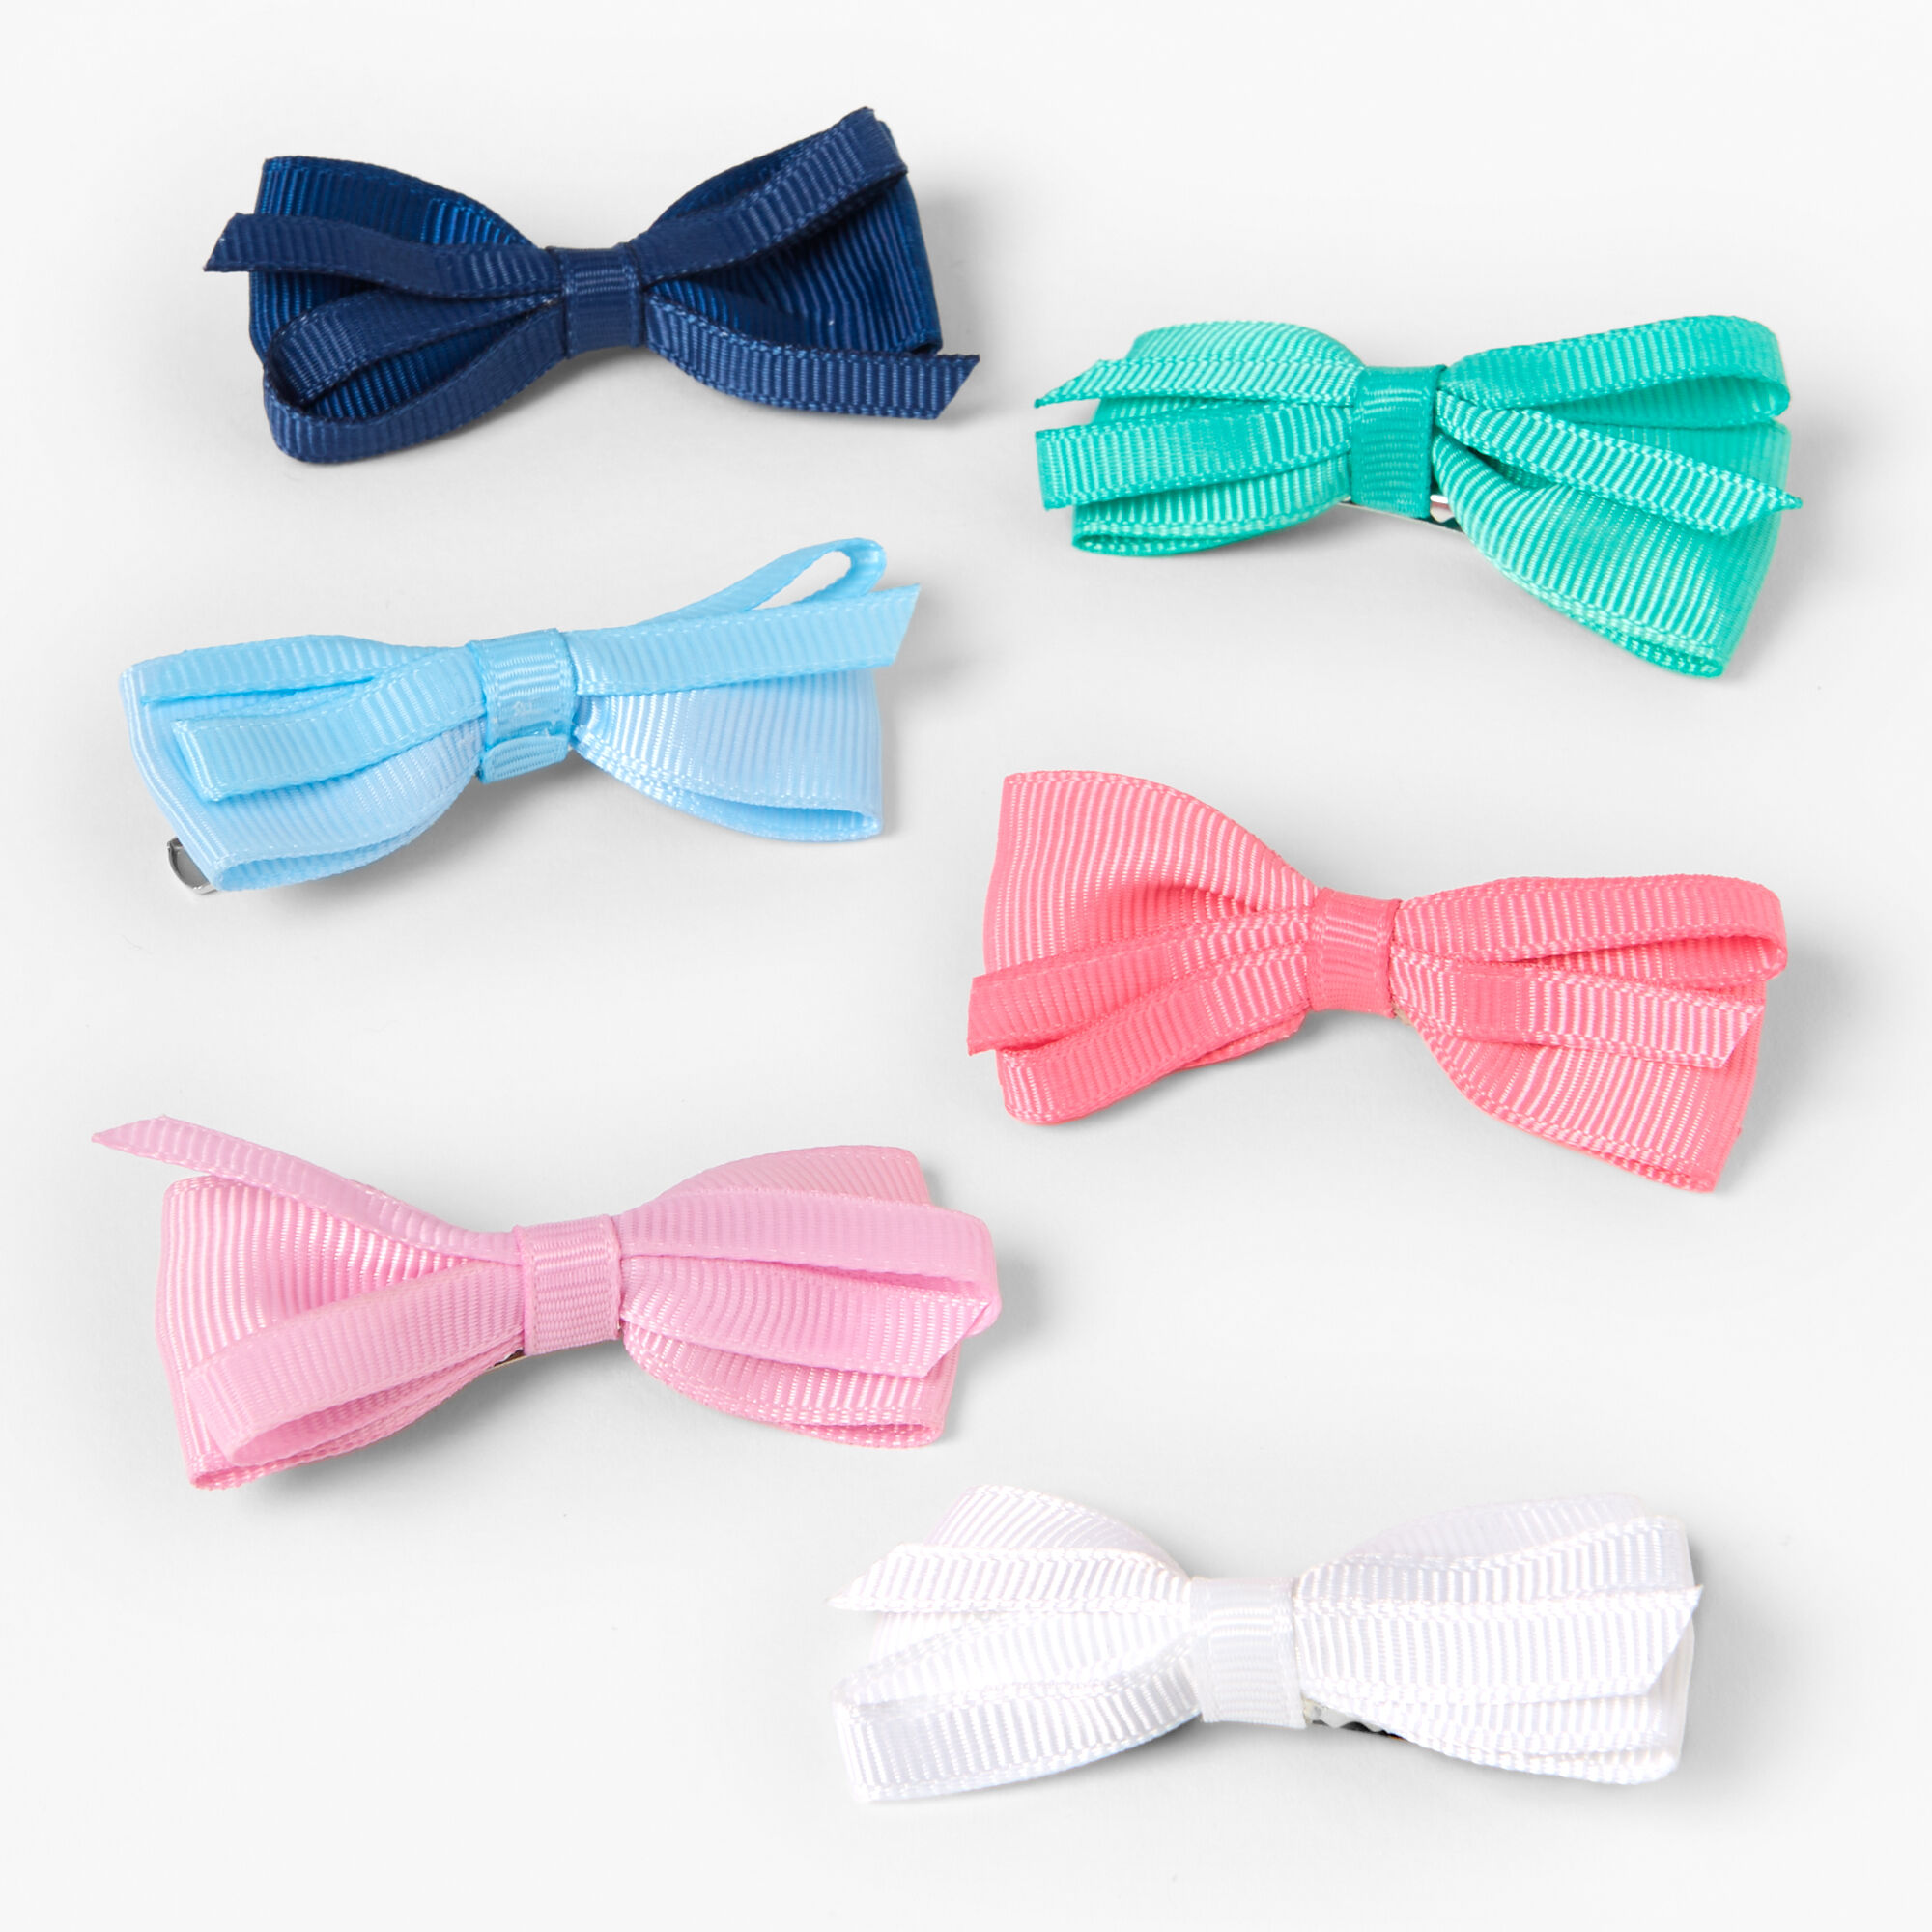 View Claires Club Preppy Pastel Hair Bow Clips 6 Pack information